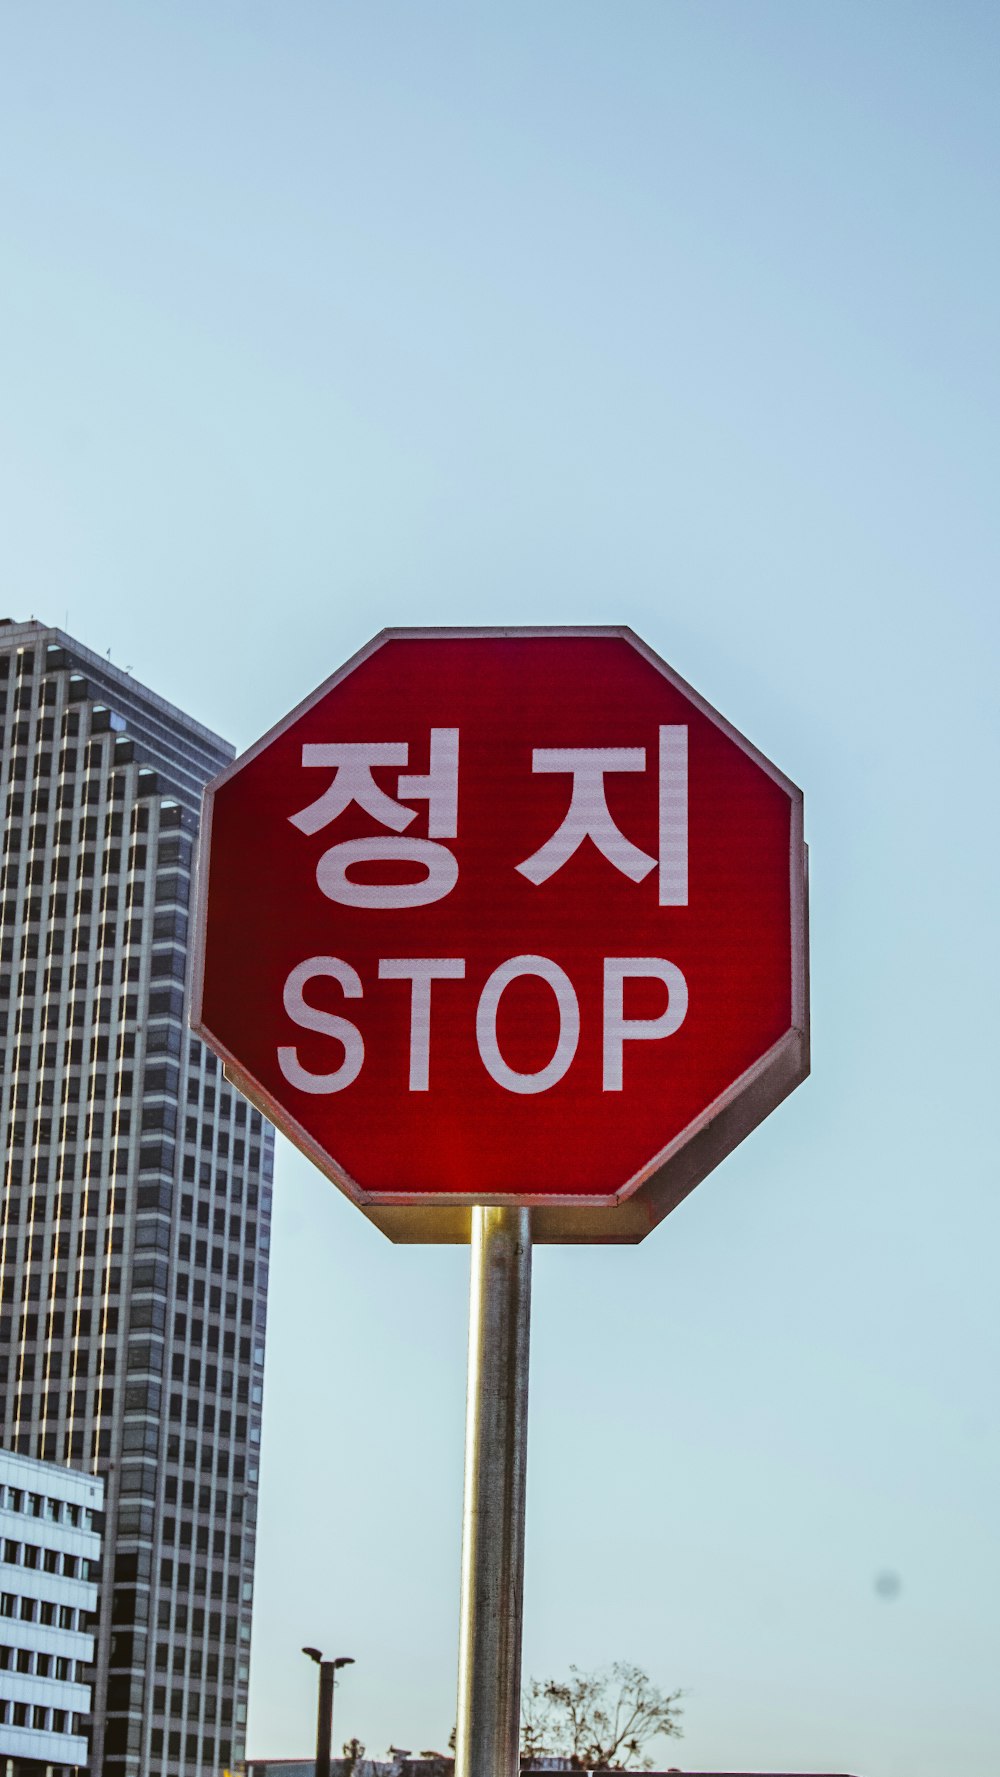 stop traffic signage near building